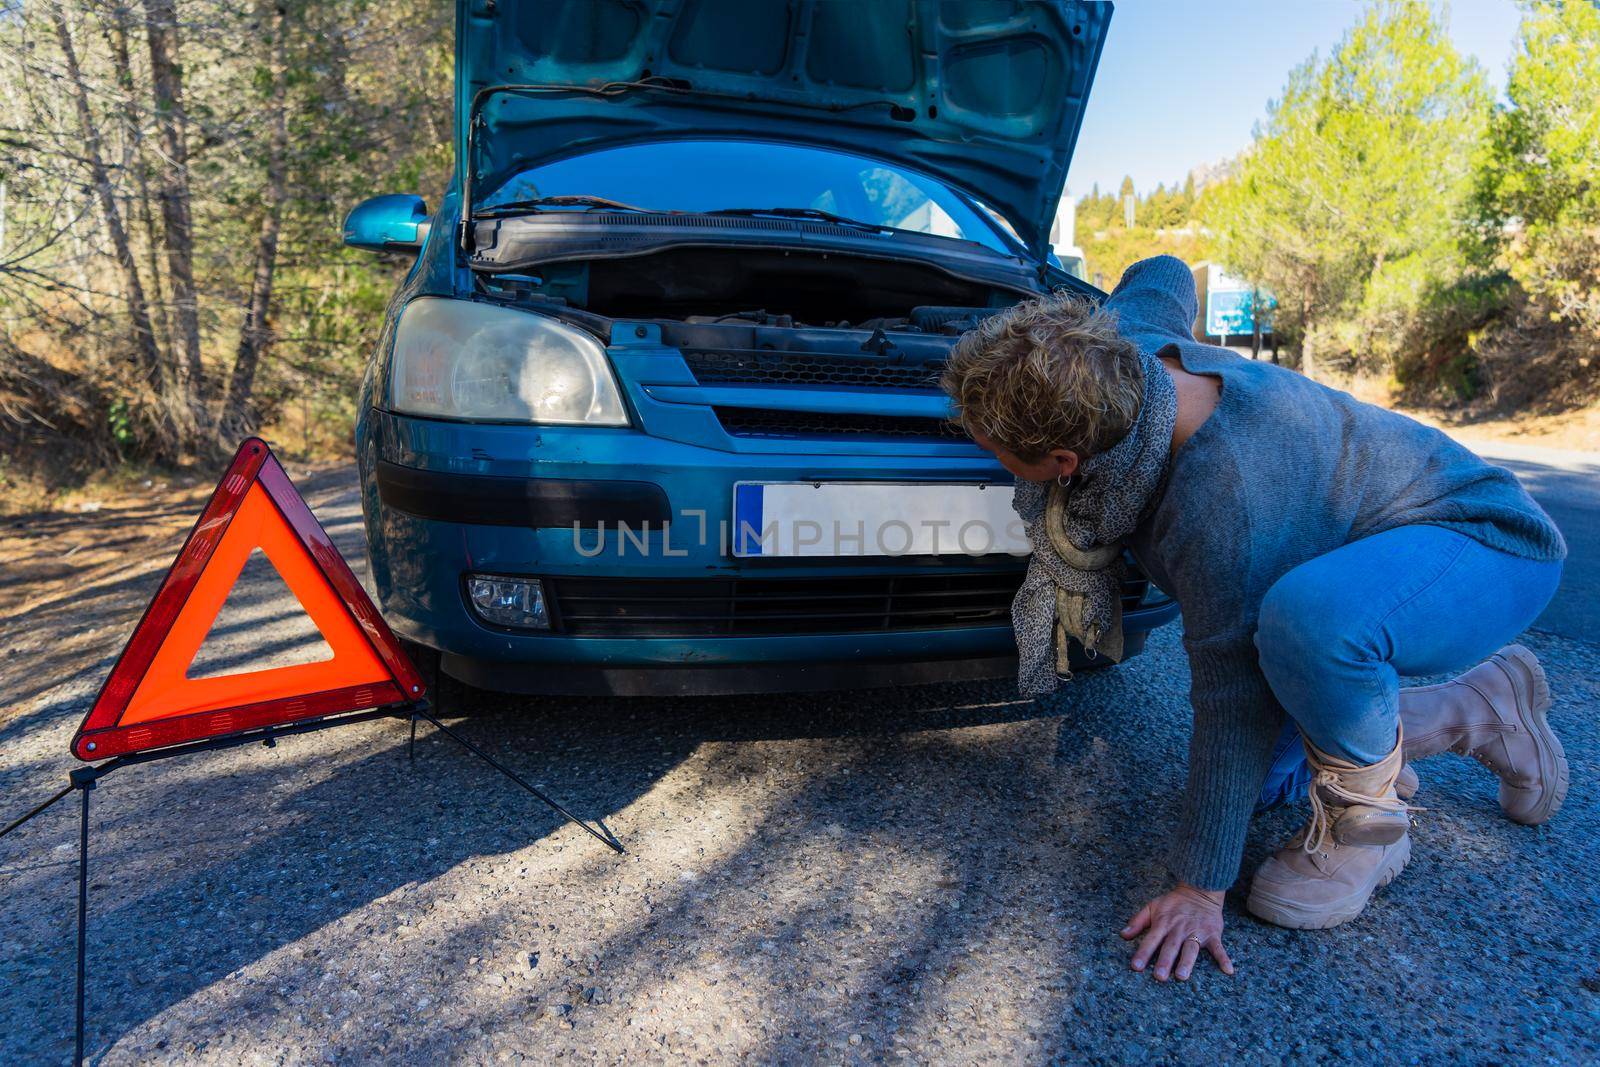 Caucasian blonde adult female observing engine failure in her car while traveling. Small blue car with engine failure. Modern and autonomous adult woman trying to fix her car on the road. She has red safety triangle on the ground. Very sunny clear day.